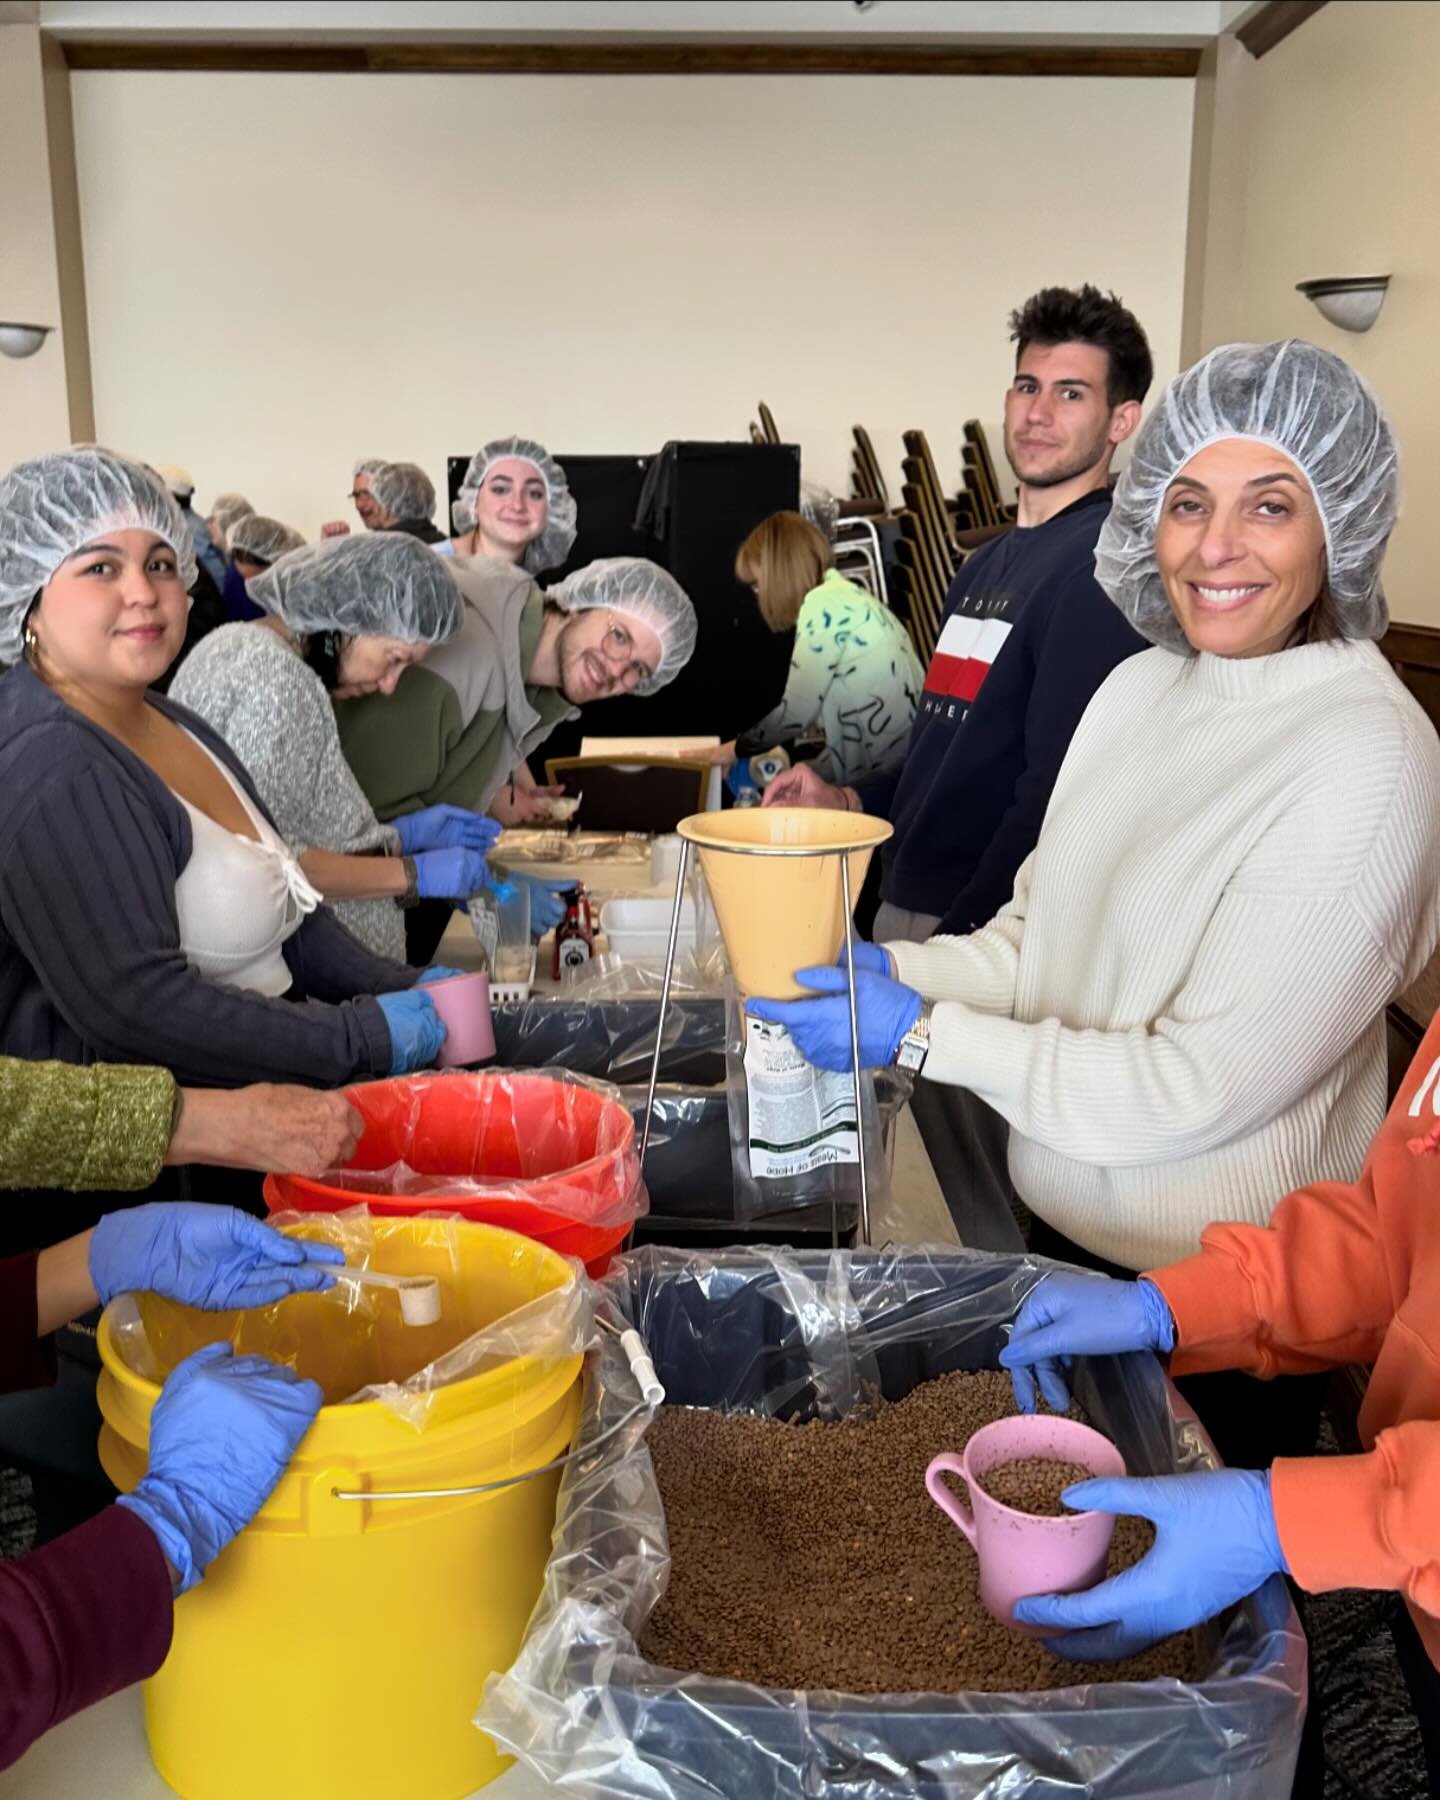 Today our Ladies Philoptochos hosted with our over 100 volunteers from the parish, Meals of Hope. Today those volunteers helped prepare, fill, seal and package 35,000 meals. These meals will go to help the needy of the Denver area. What an amazing ev